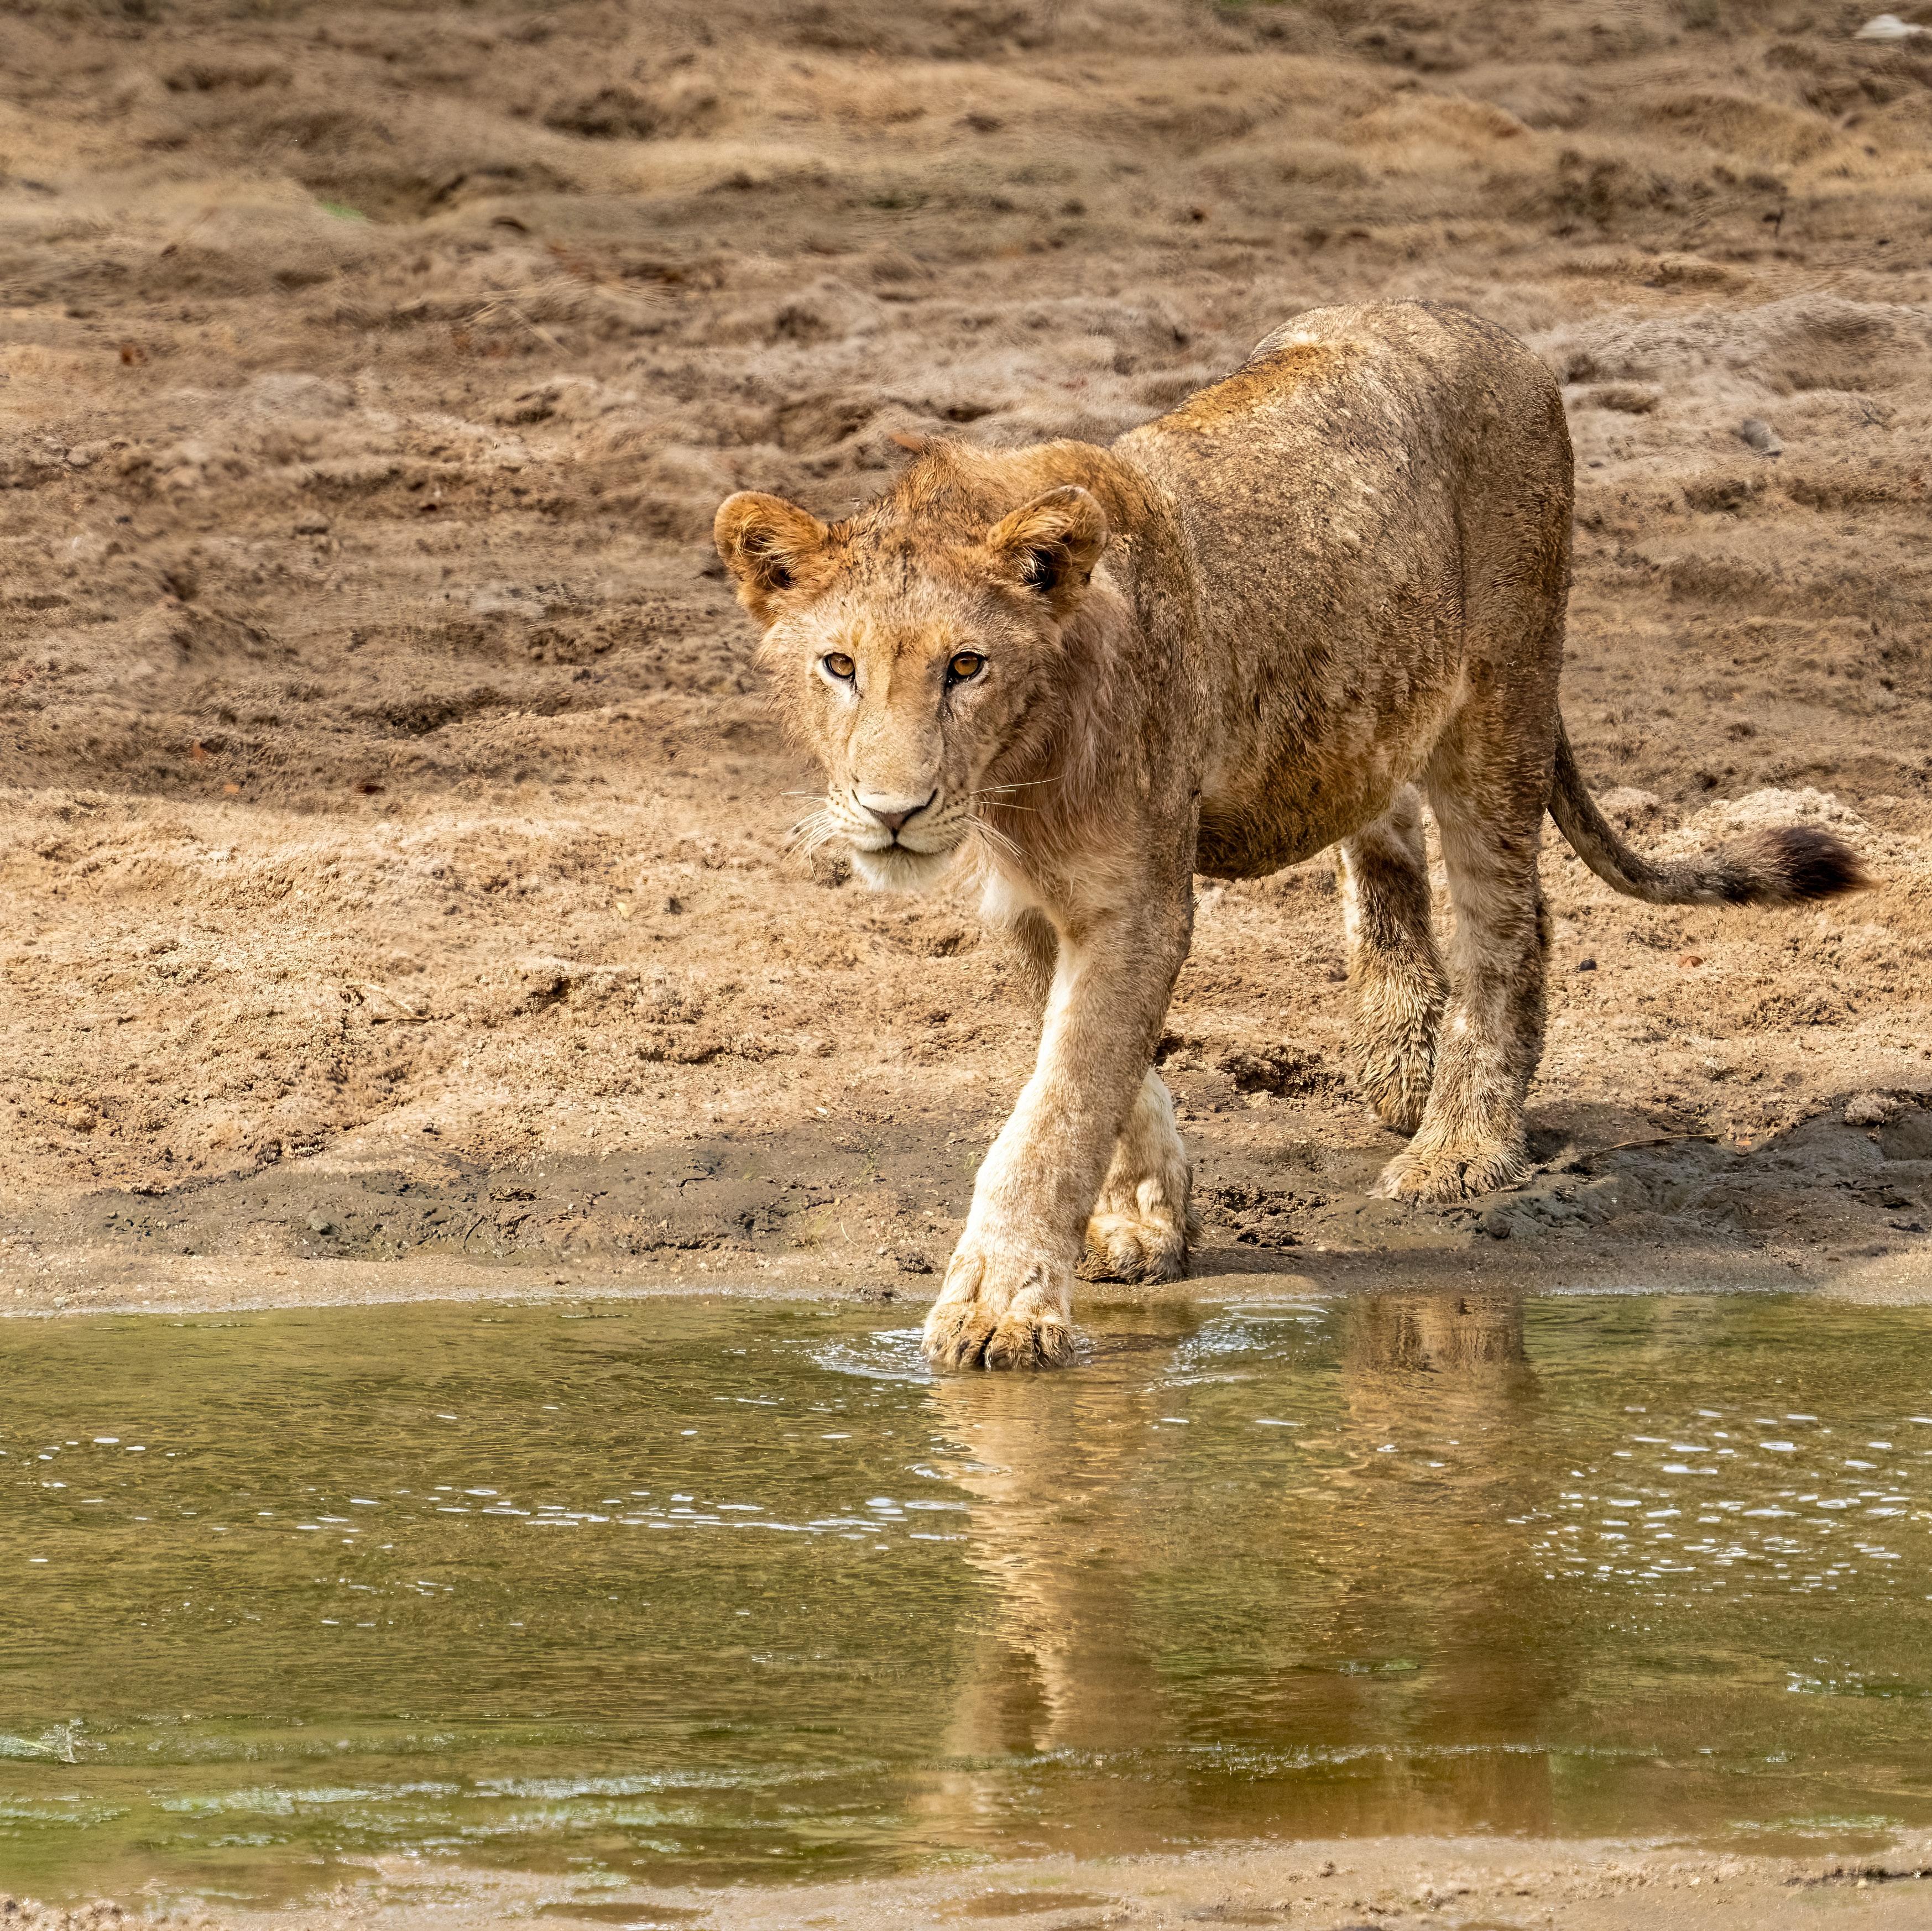 Where do lions drink water? 